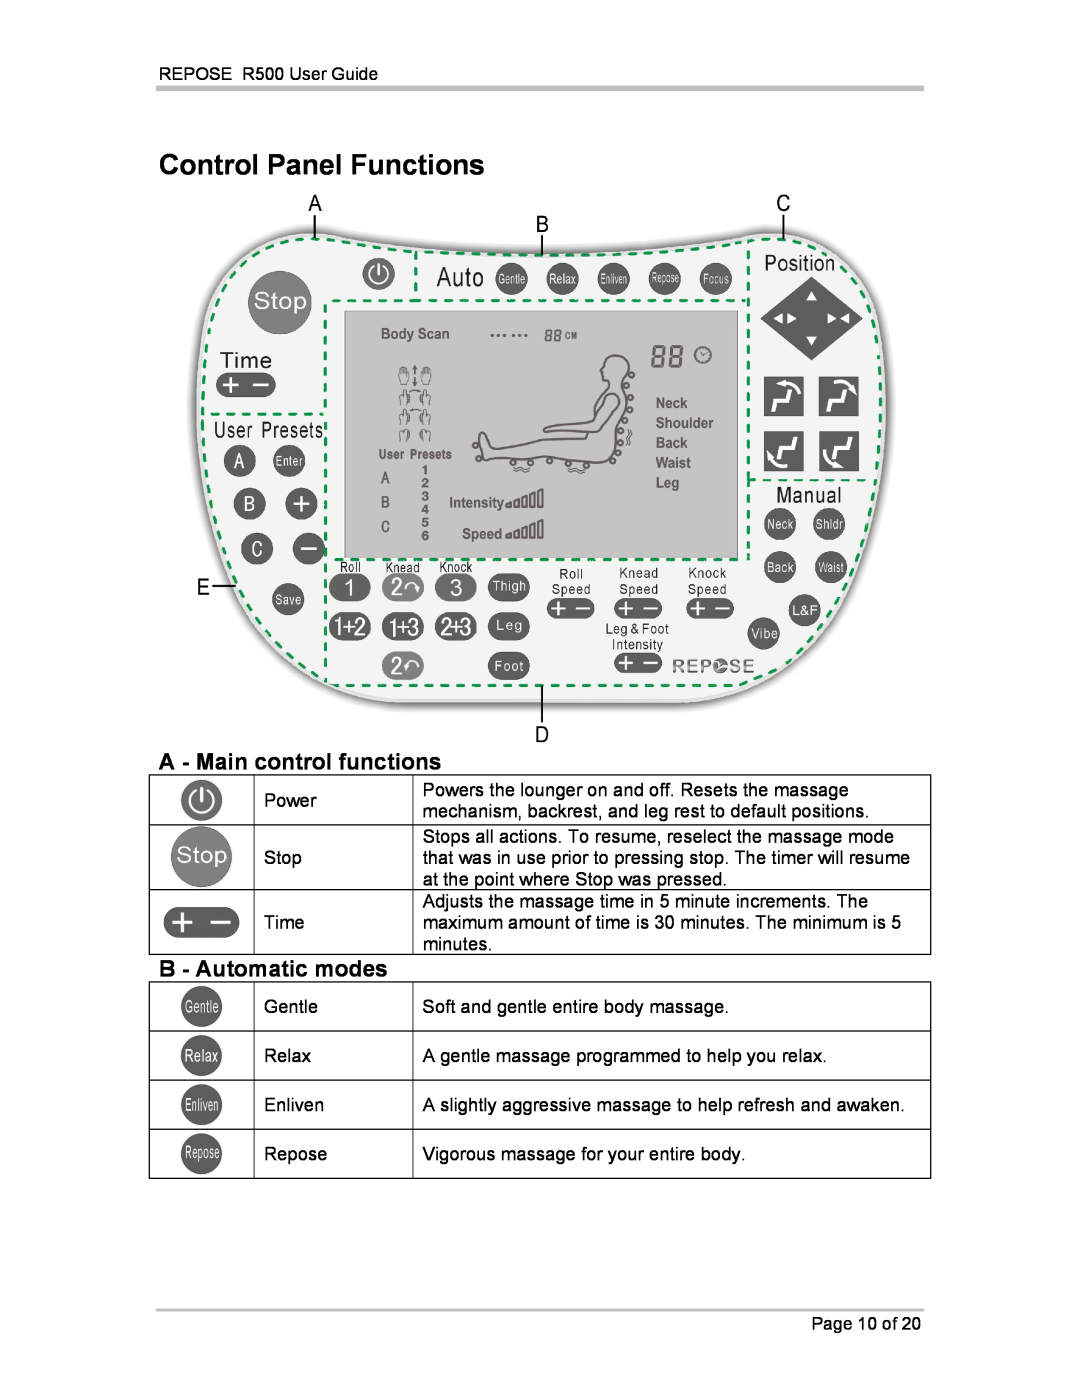 Repose R500 manual Control Panel Functions, A - Main control functions, B - Automatic modes 